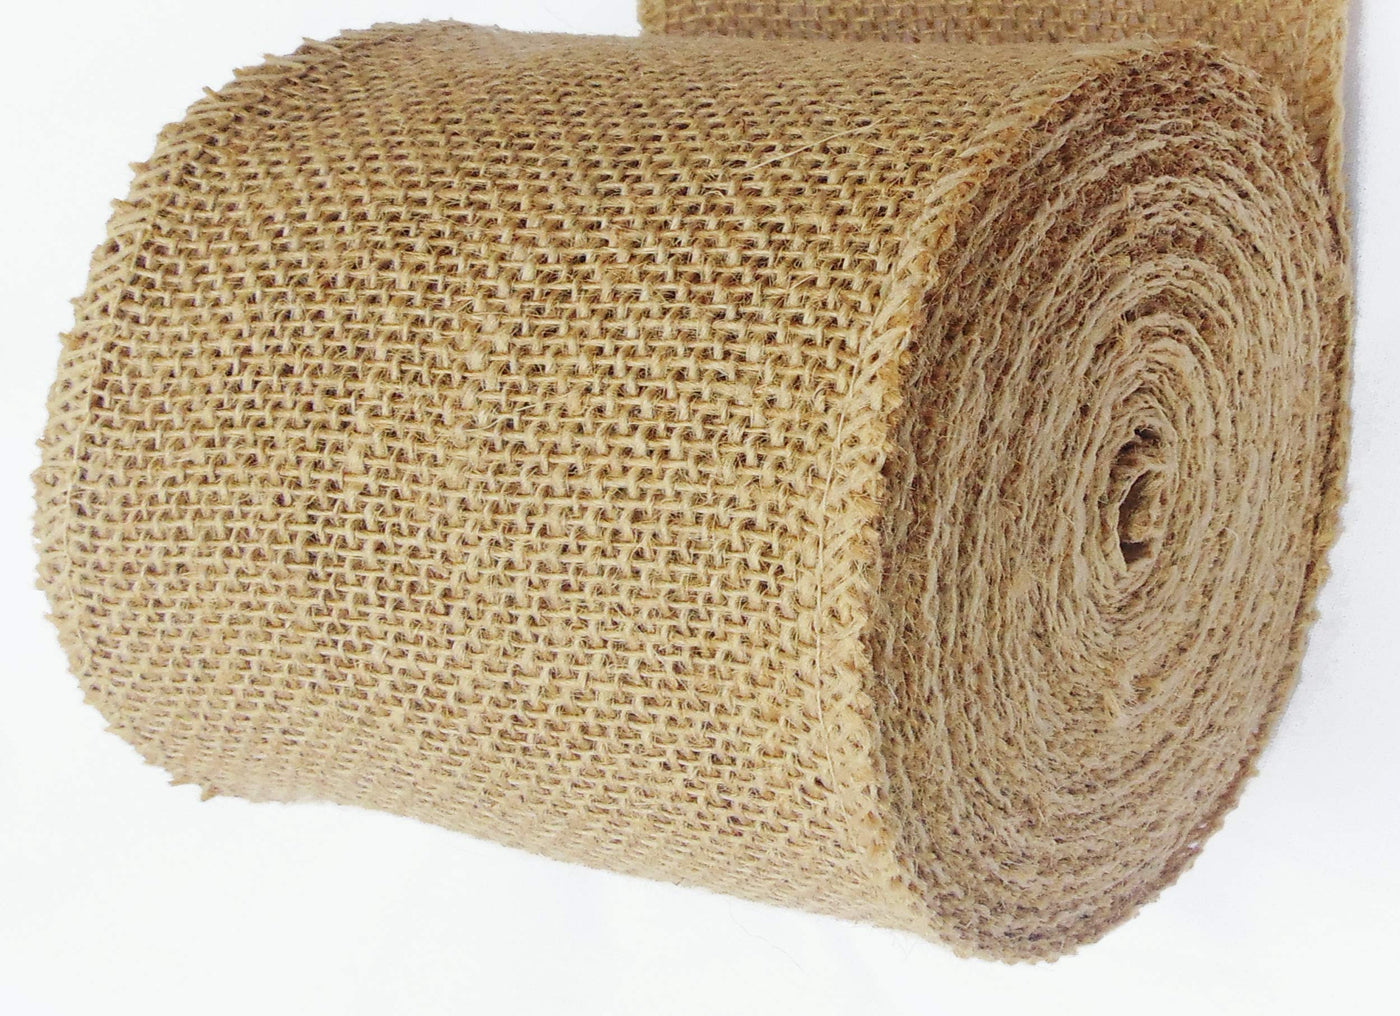 AAYU Natural Burlap Ribbon Rolls 4 Inches x 5 Yards Pack of 3 Organic Jute Ribbon for Crafts Gift Wrapping Wedding